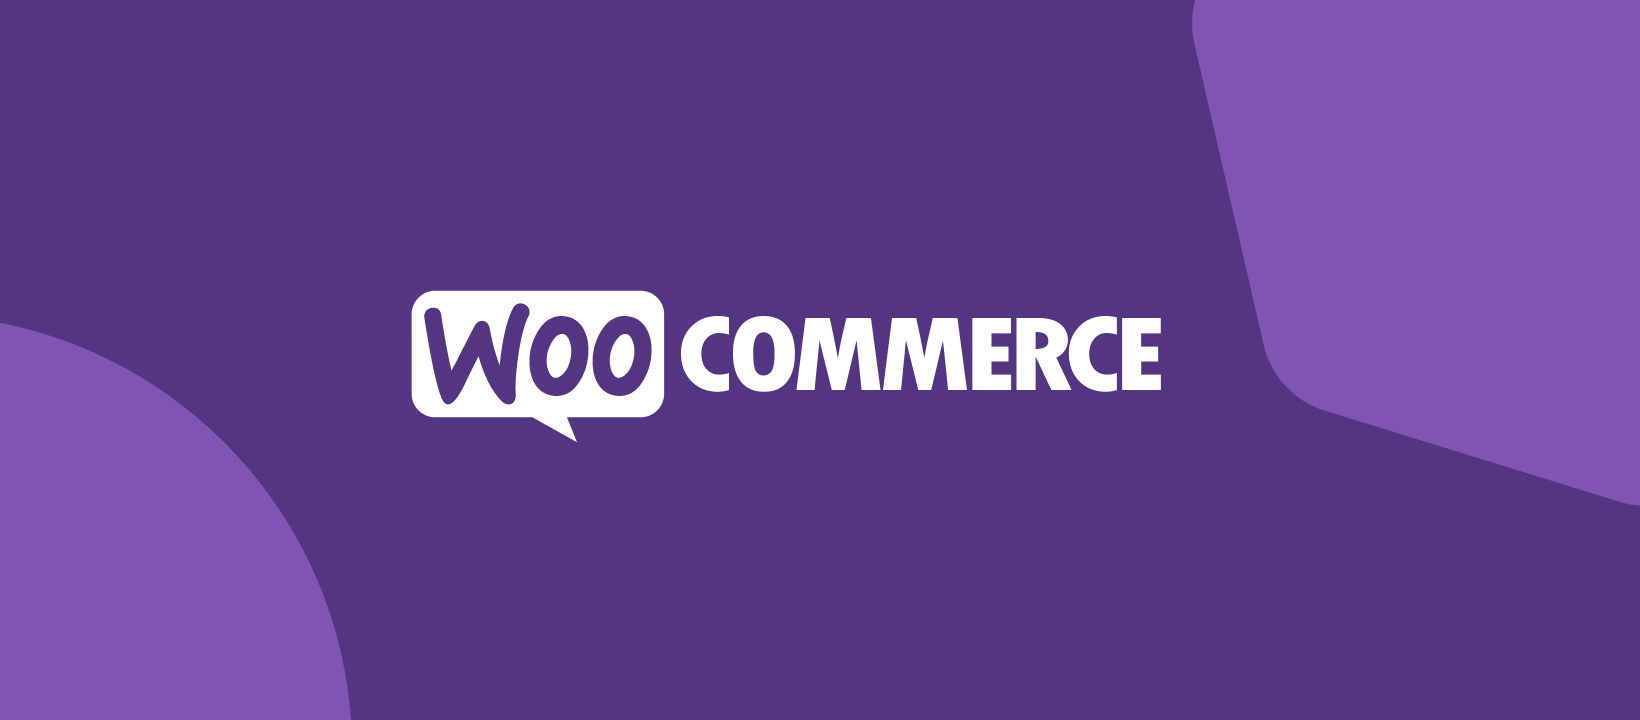 Woocommerce PHP Snippet – Adaugare poza de produs in template-ul de mail